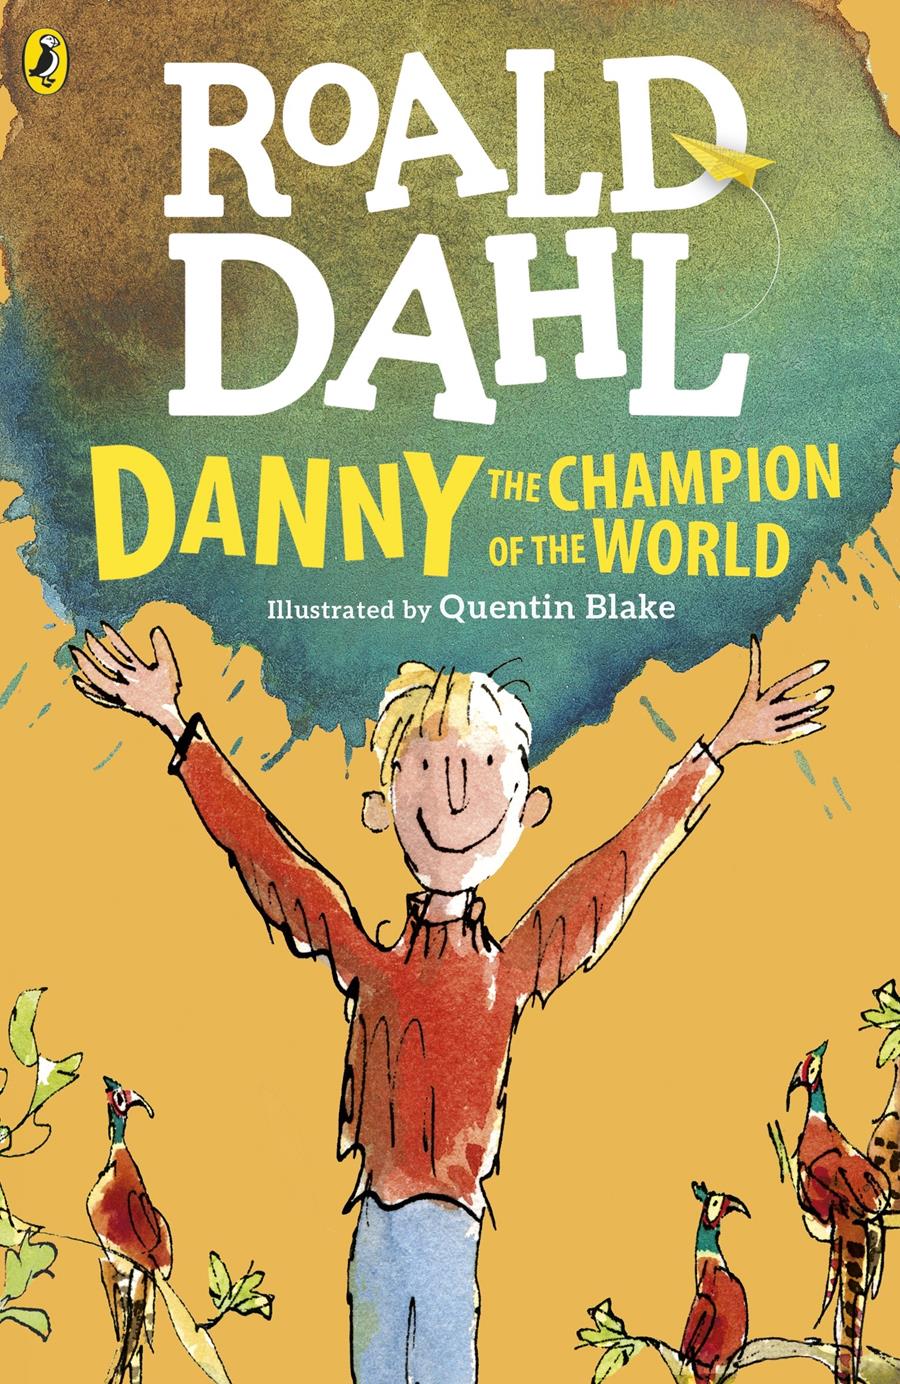 DANNY THE CHAMPION OF THE WORLD | 9780141365411 | DAHL, ROALD ; BLAKE, QUENTIN